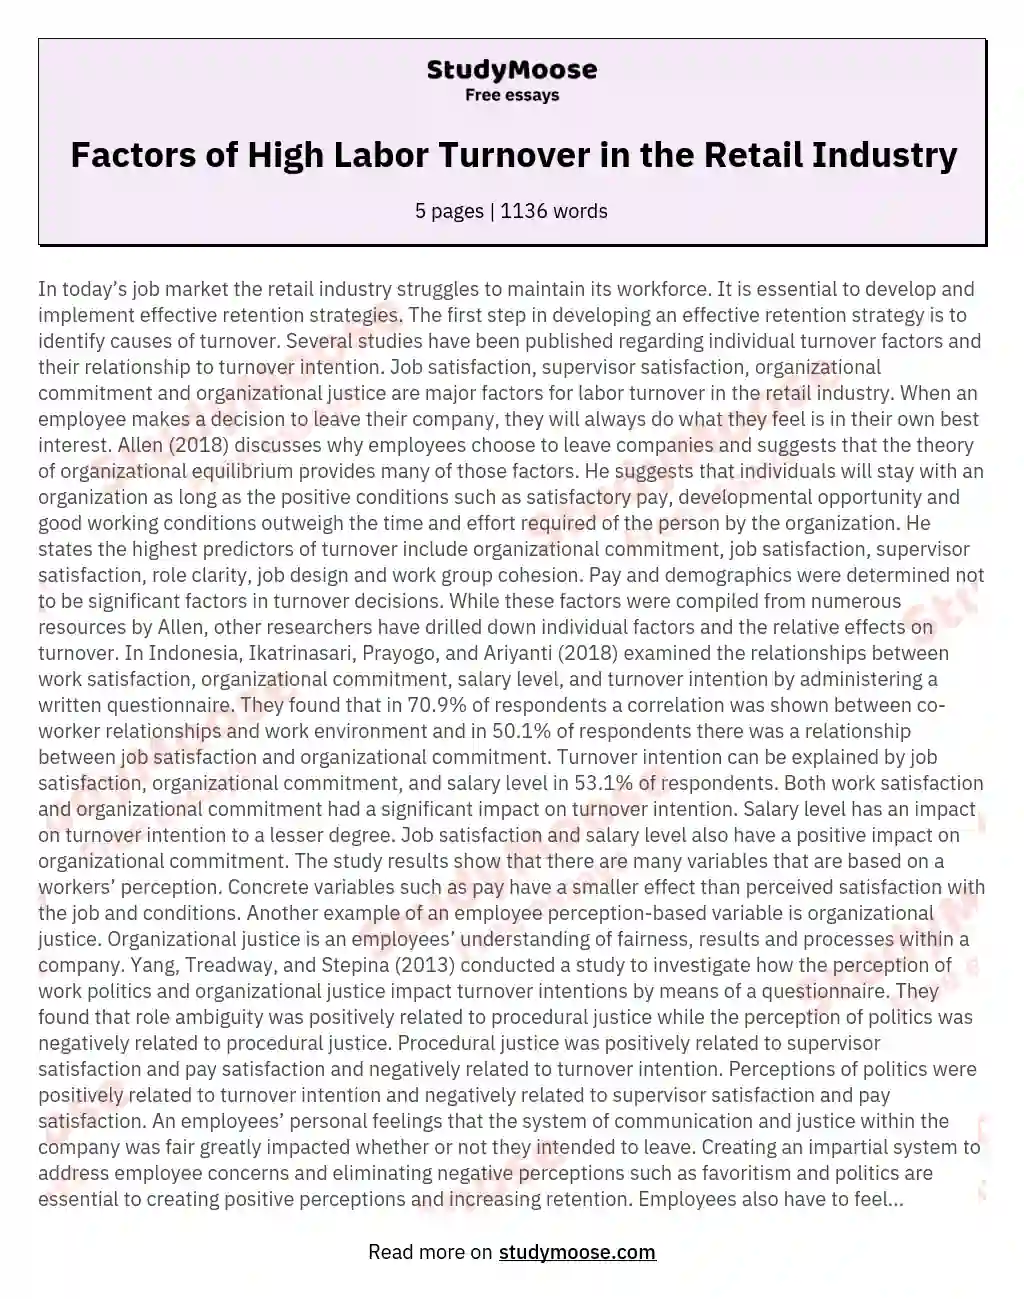 Factors of High Labor Turnover in the Retail Industry